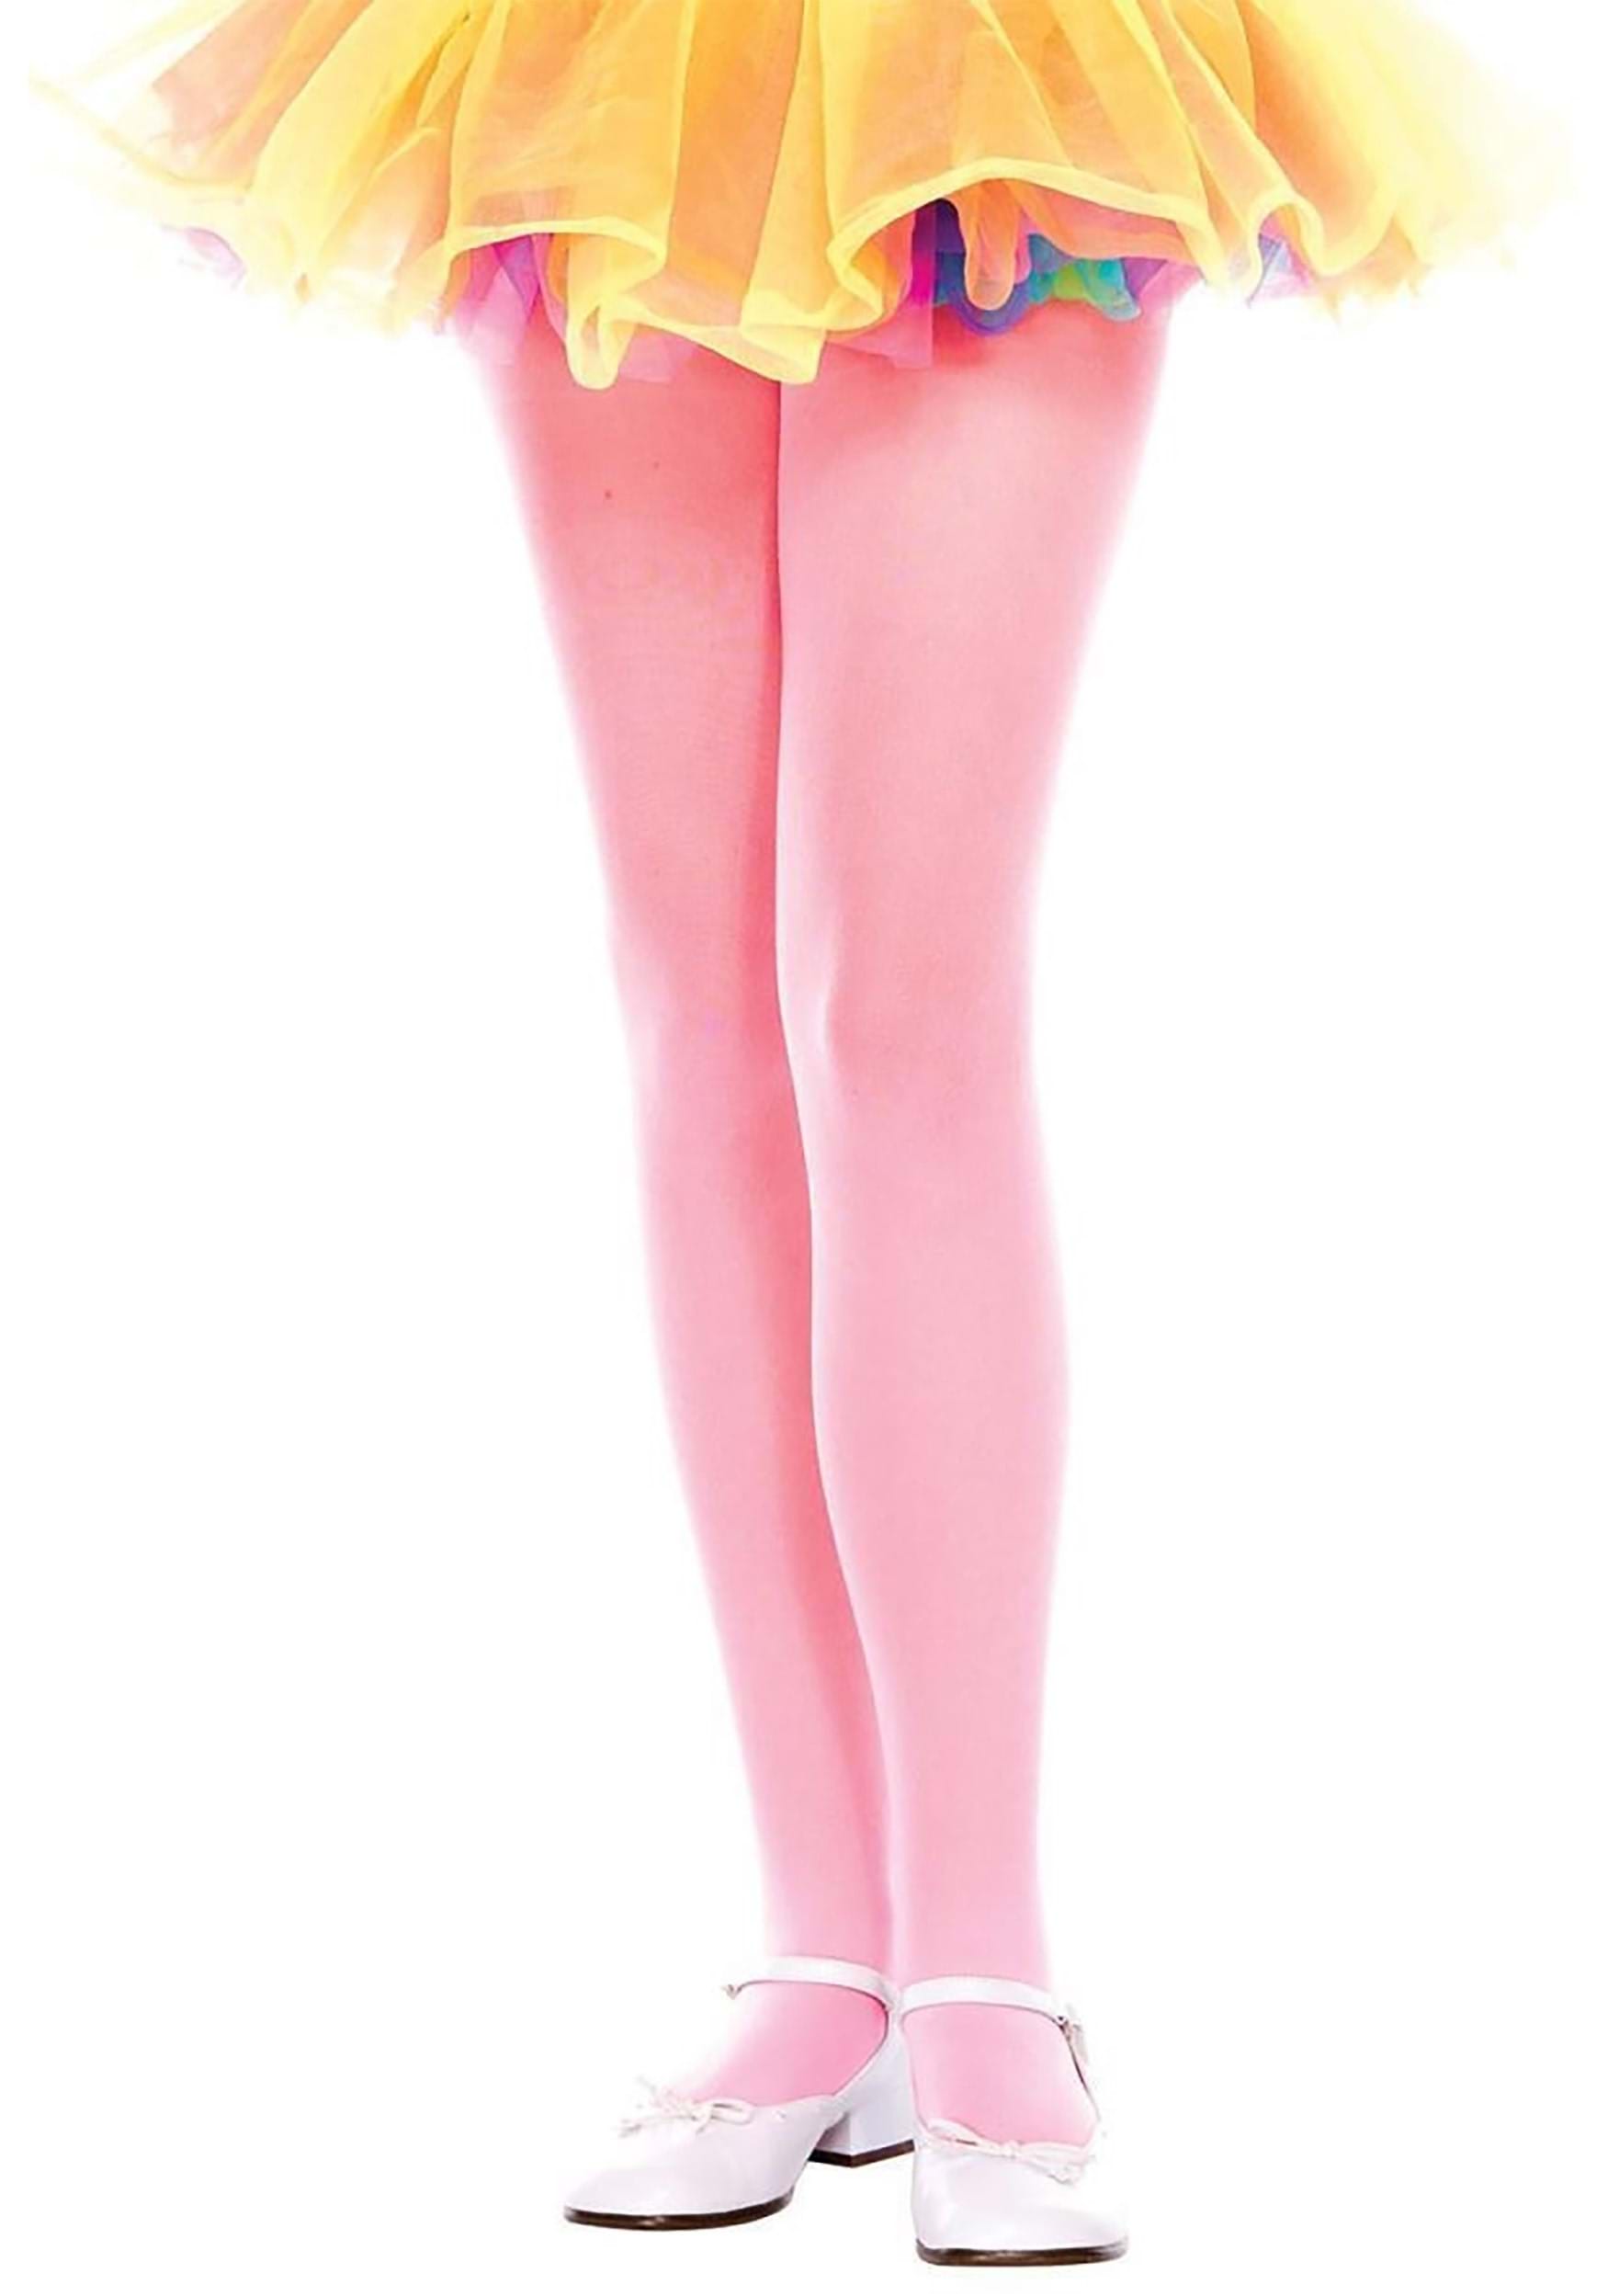 https://images.halloweencostumes.com/products/93457/1-1/kids-light-pink-opaque-tights.jpg